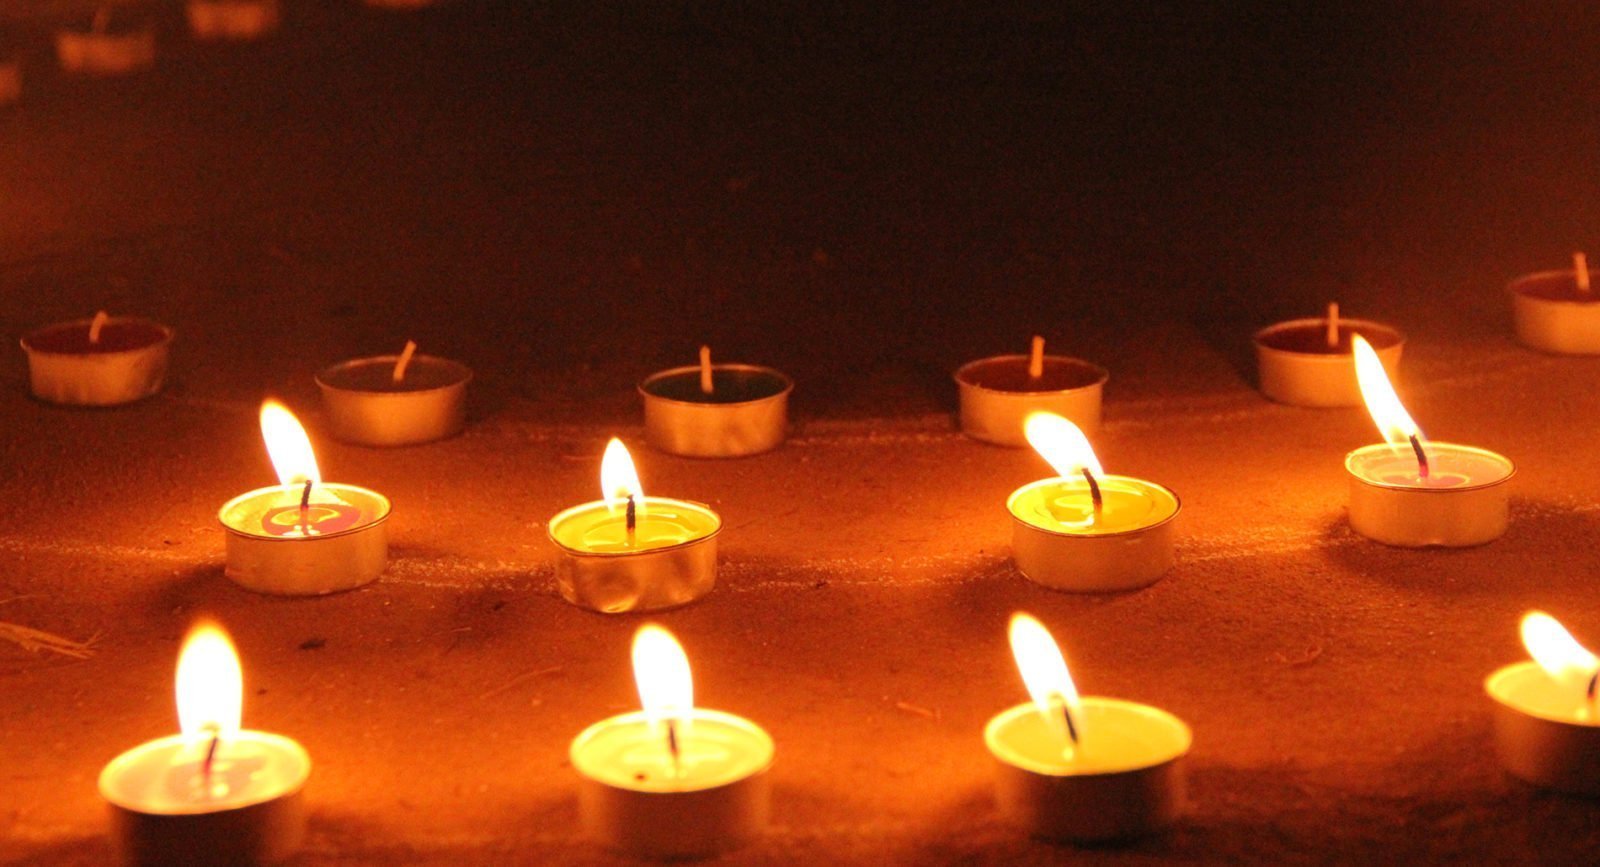 Close-up of some small lit candles lined up in a row.